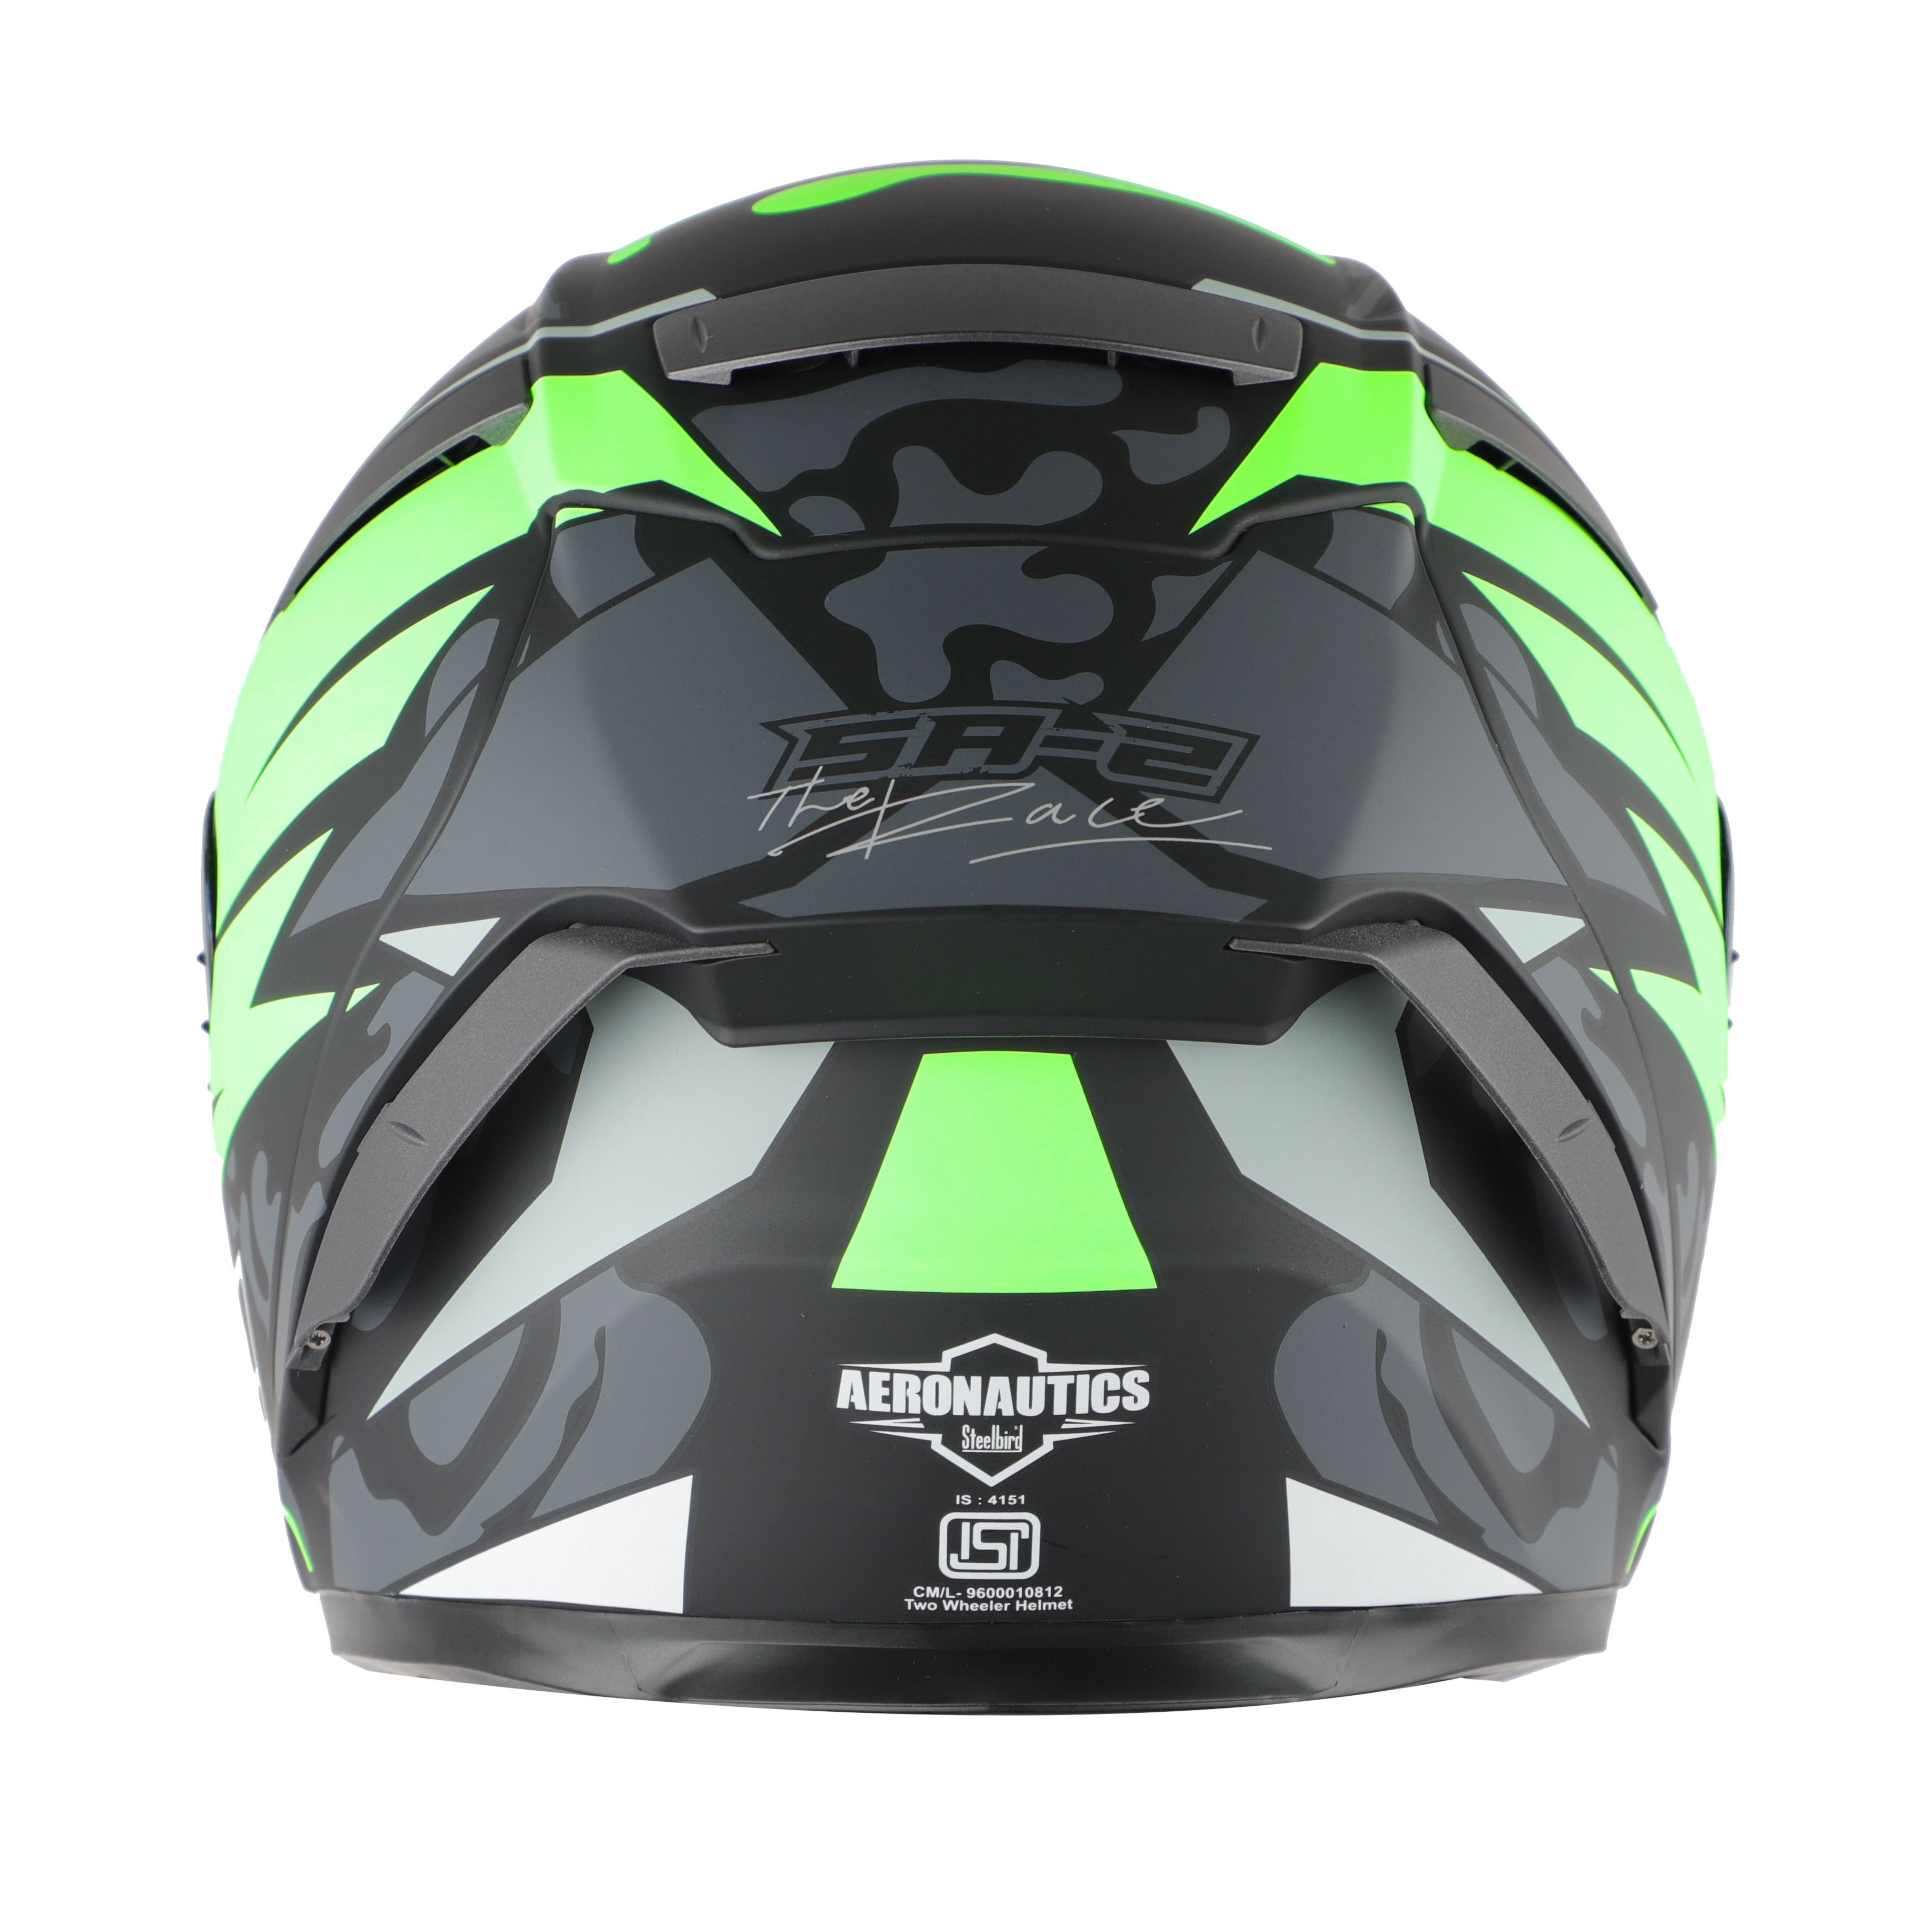 SA-2 TERMINATOR 3.0 GLOSSY BLACK WITH GREEN FITTED WITH CLEAR VISOR EXTRA SMOKE VISOR FREE (WITH ANTI-FOR SHIELD HOLDER)